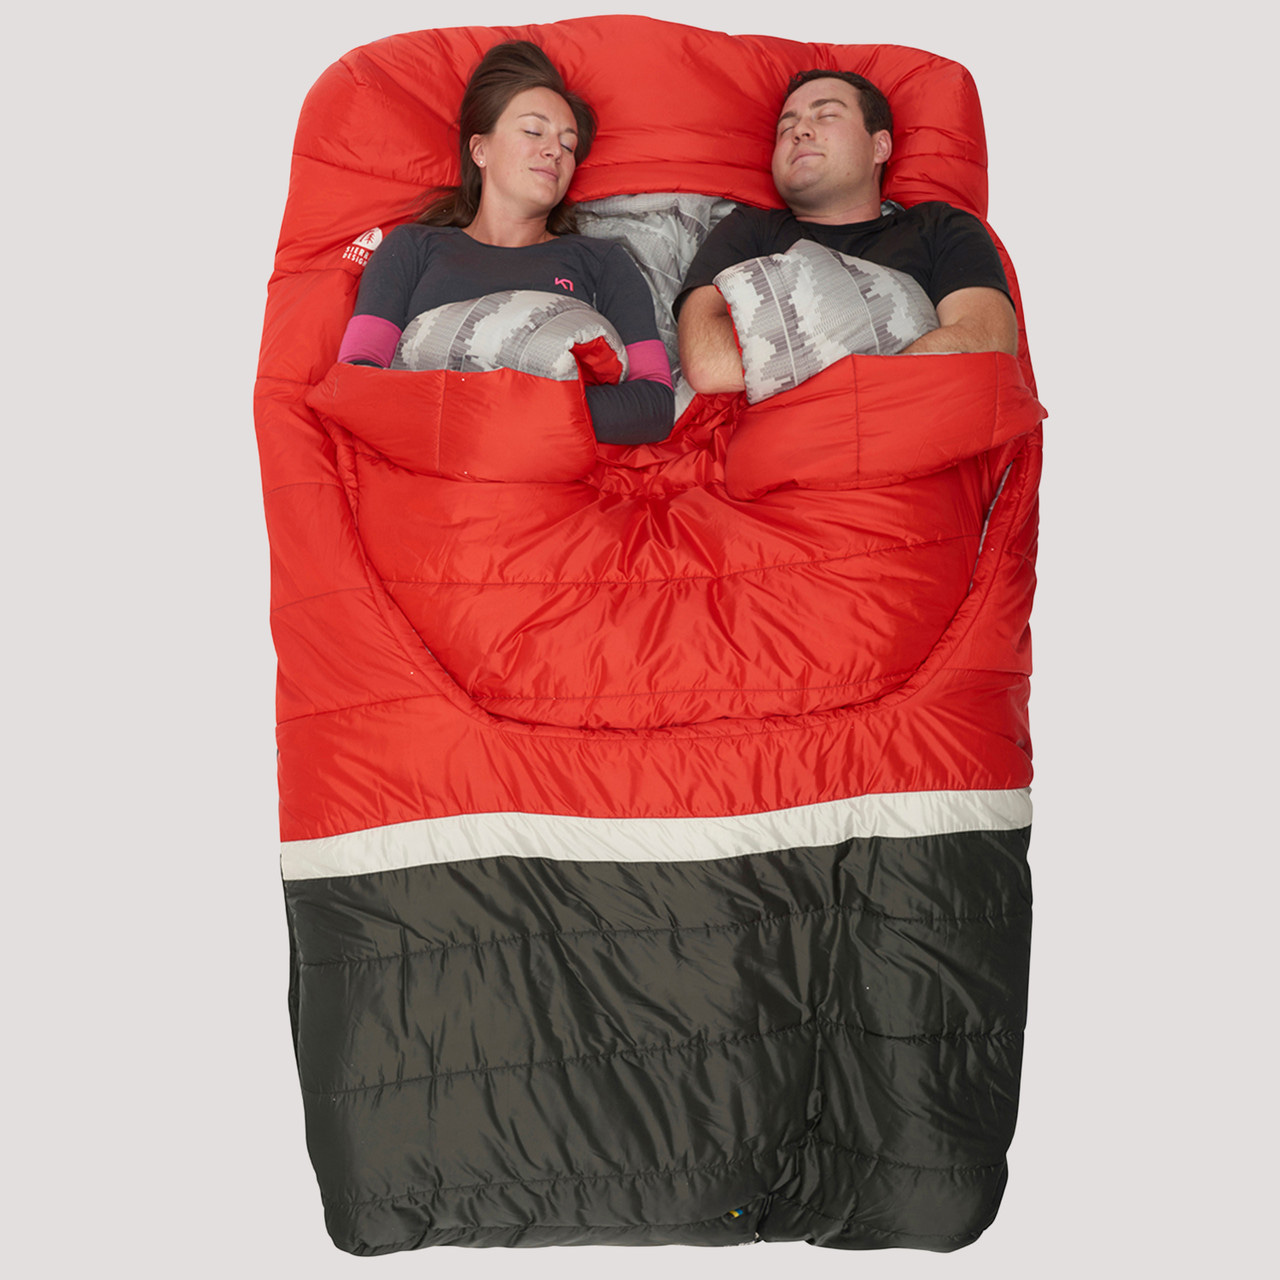 A picture containing sleeping bag, red

Description automatically generated